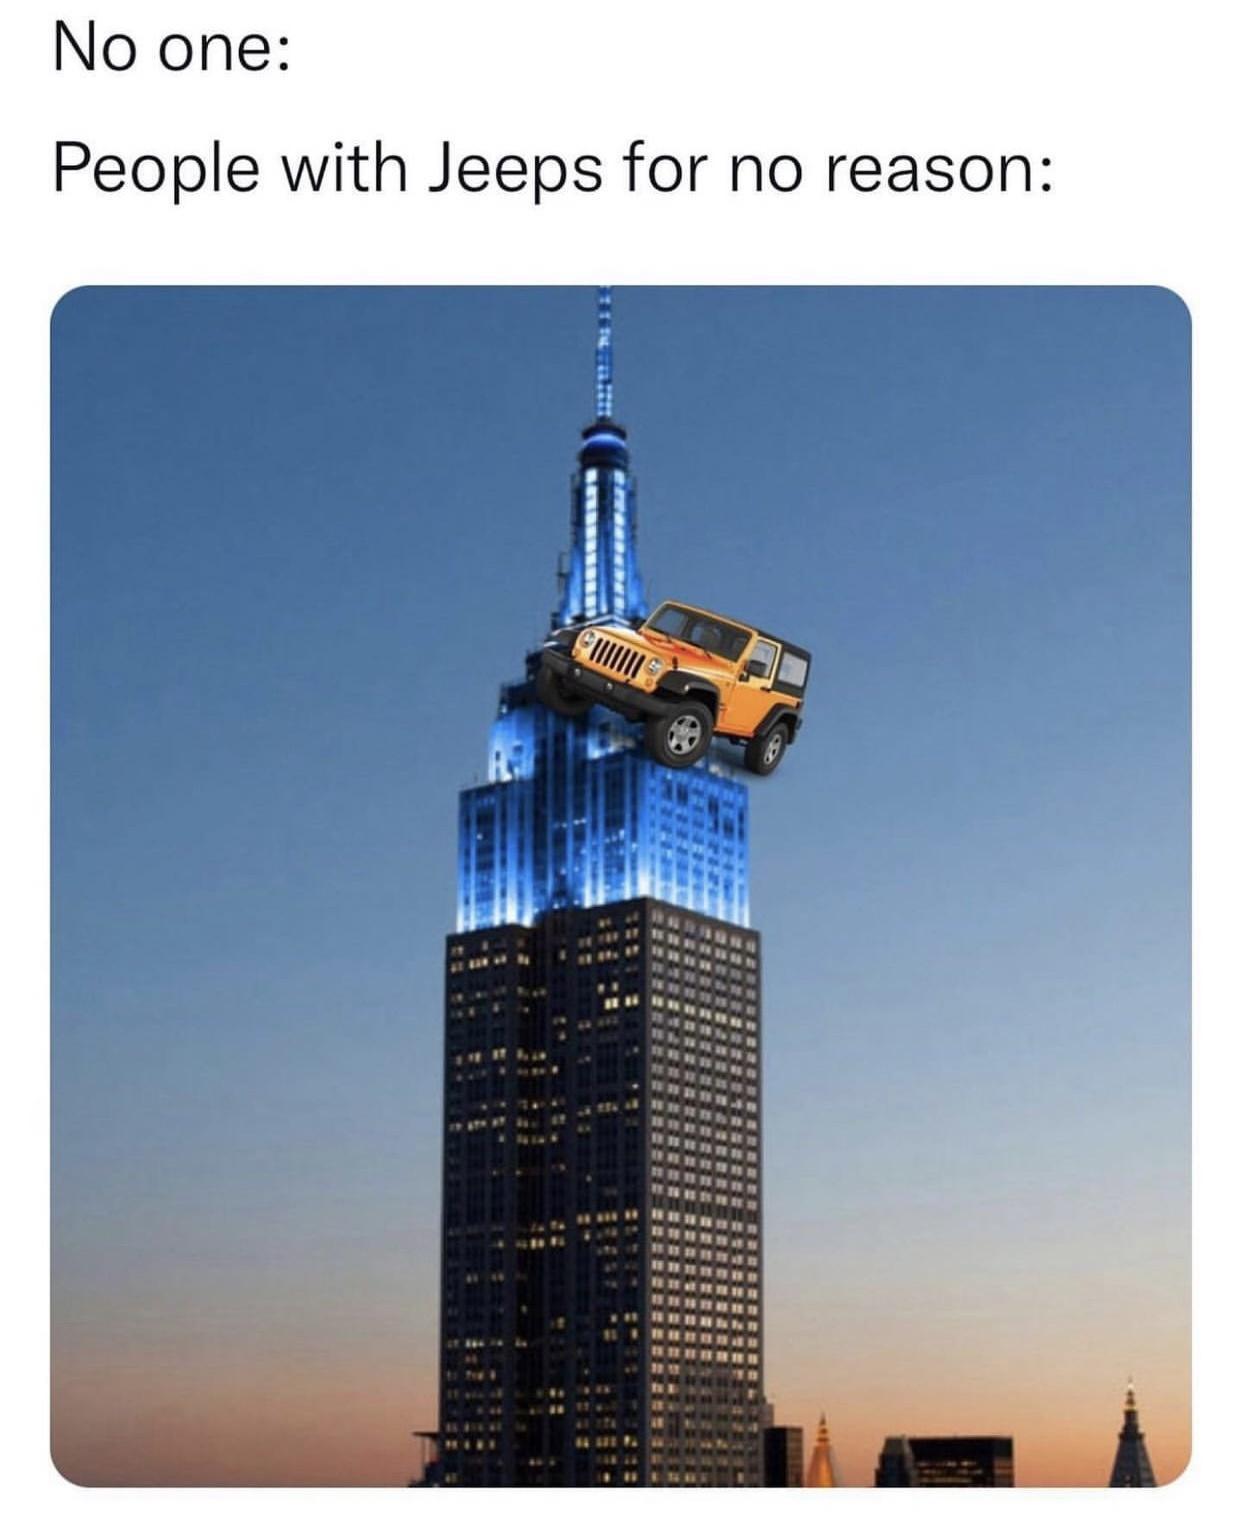 Fresh Pics And Memes - empire state building - No one People with Jeeps for no reason